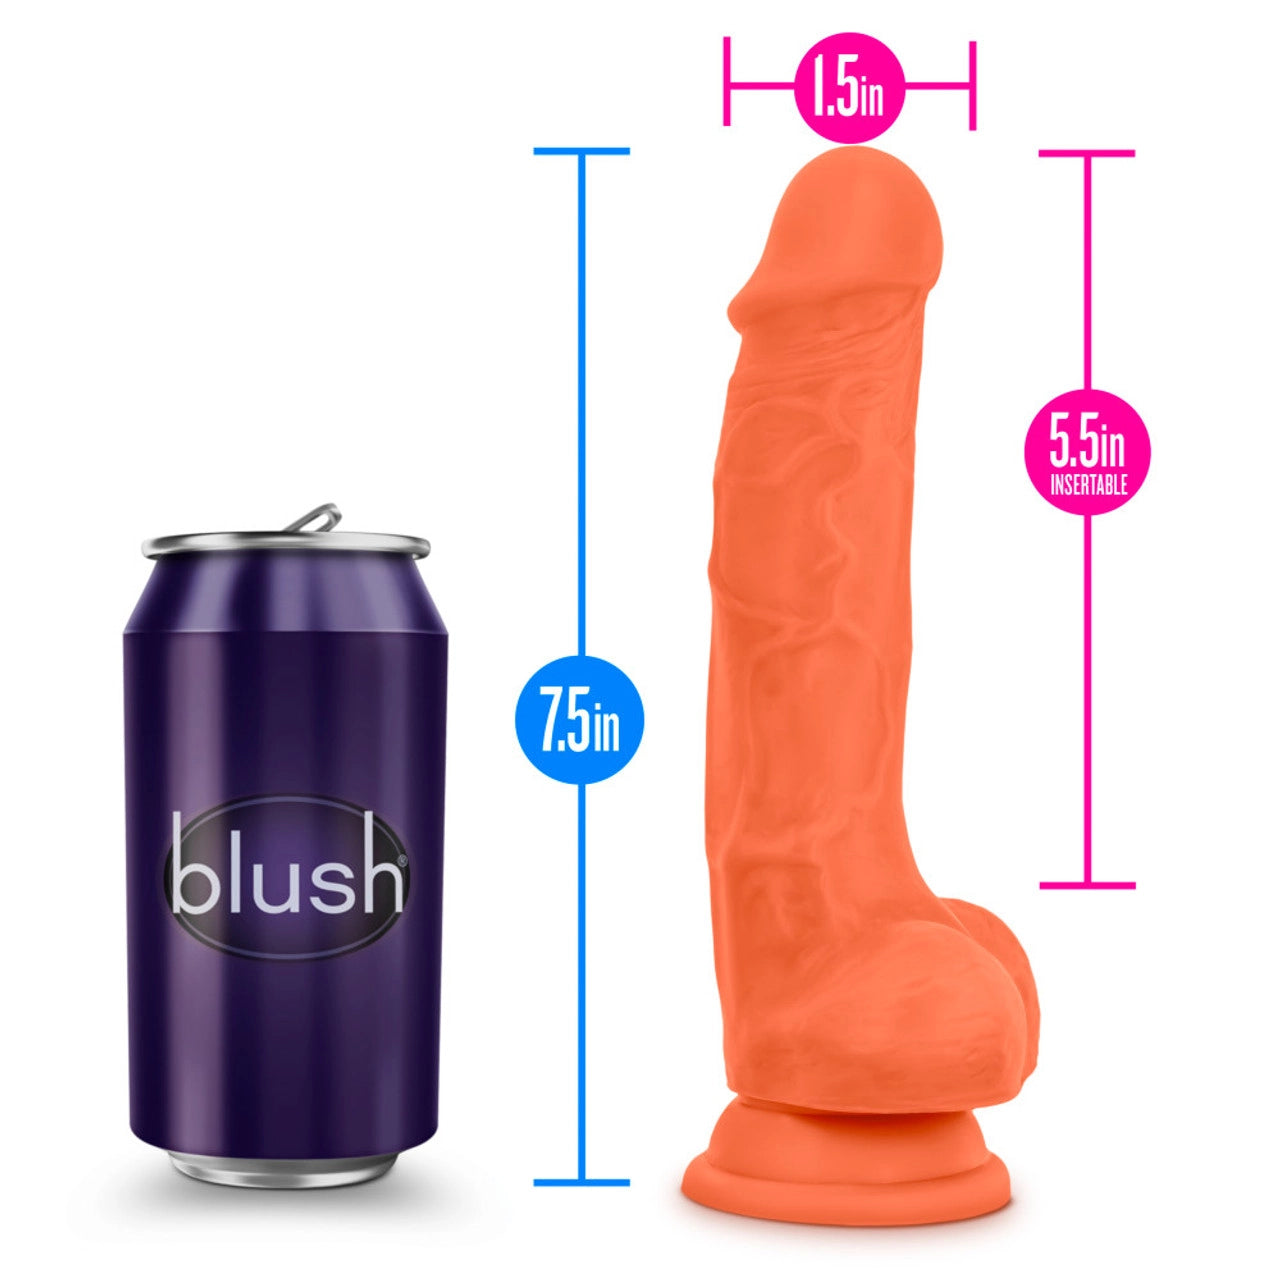 Neo Elite - 7.5 inch Silicone Dual Density Cock with Balls -  Orange/Pink